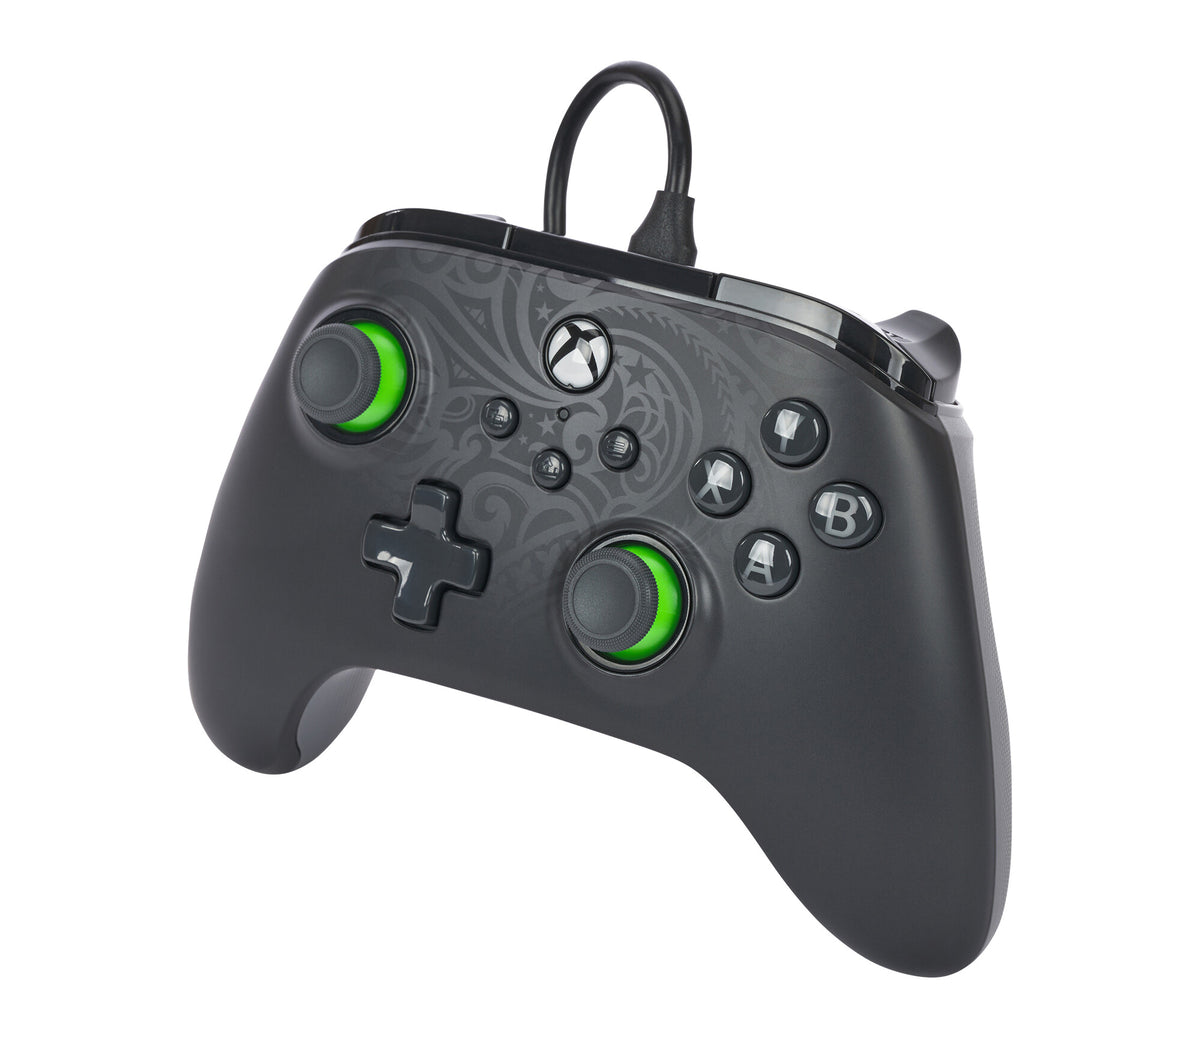 PowerA Advantage Wired Gaming Controller for PC / Xbox Series X|S in Black / Lime